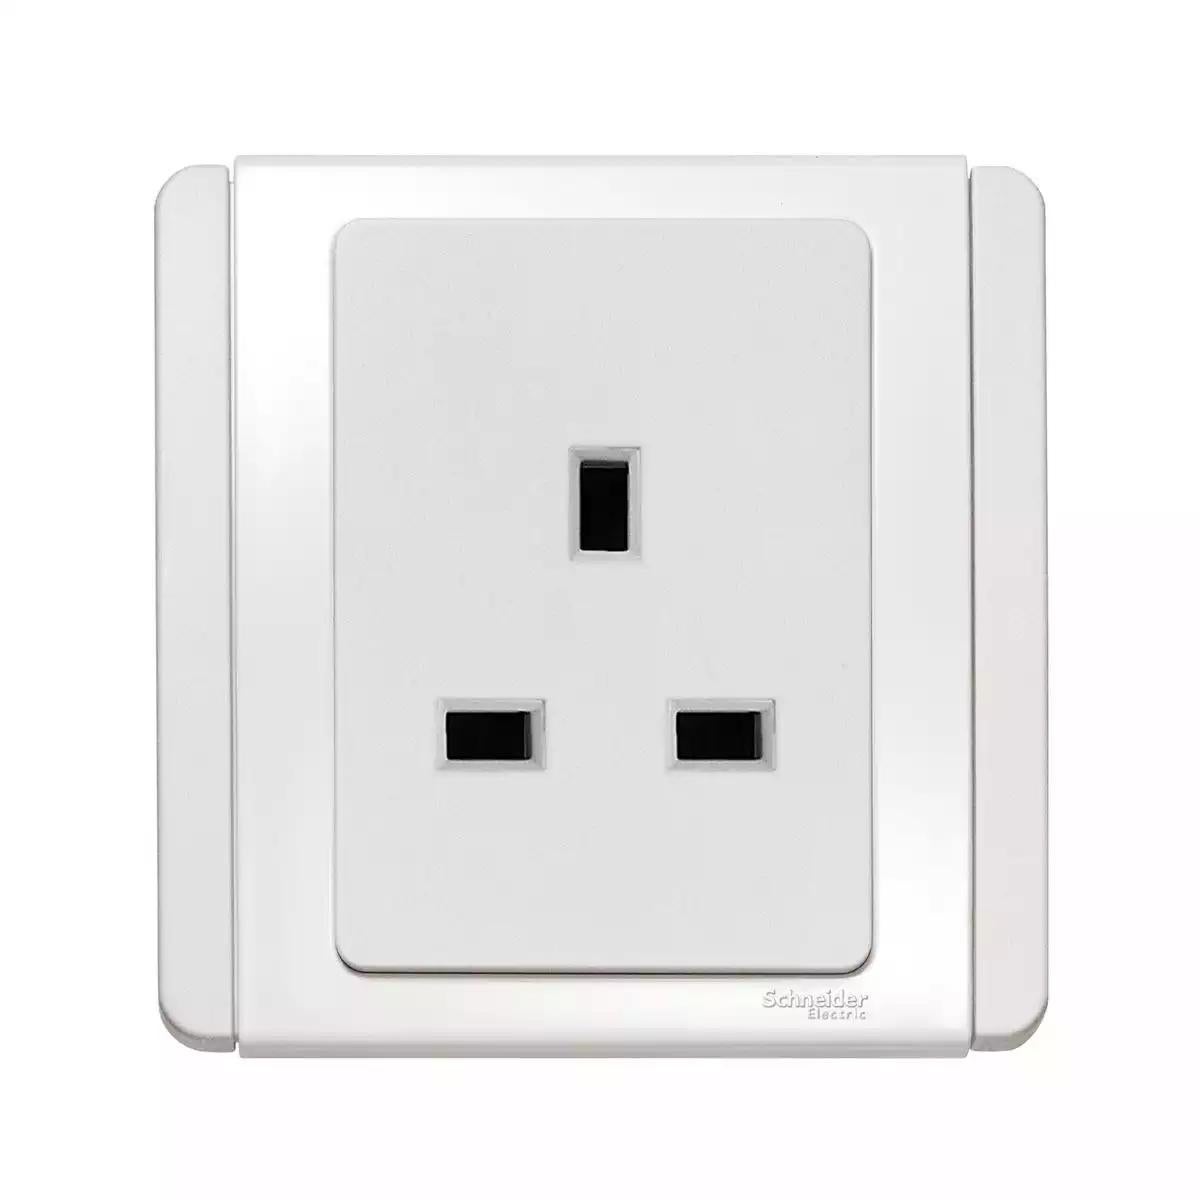 NEO 13A 3 Pin Socket Outlet White